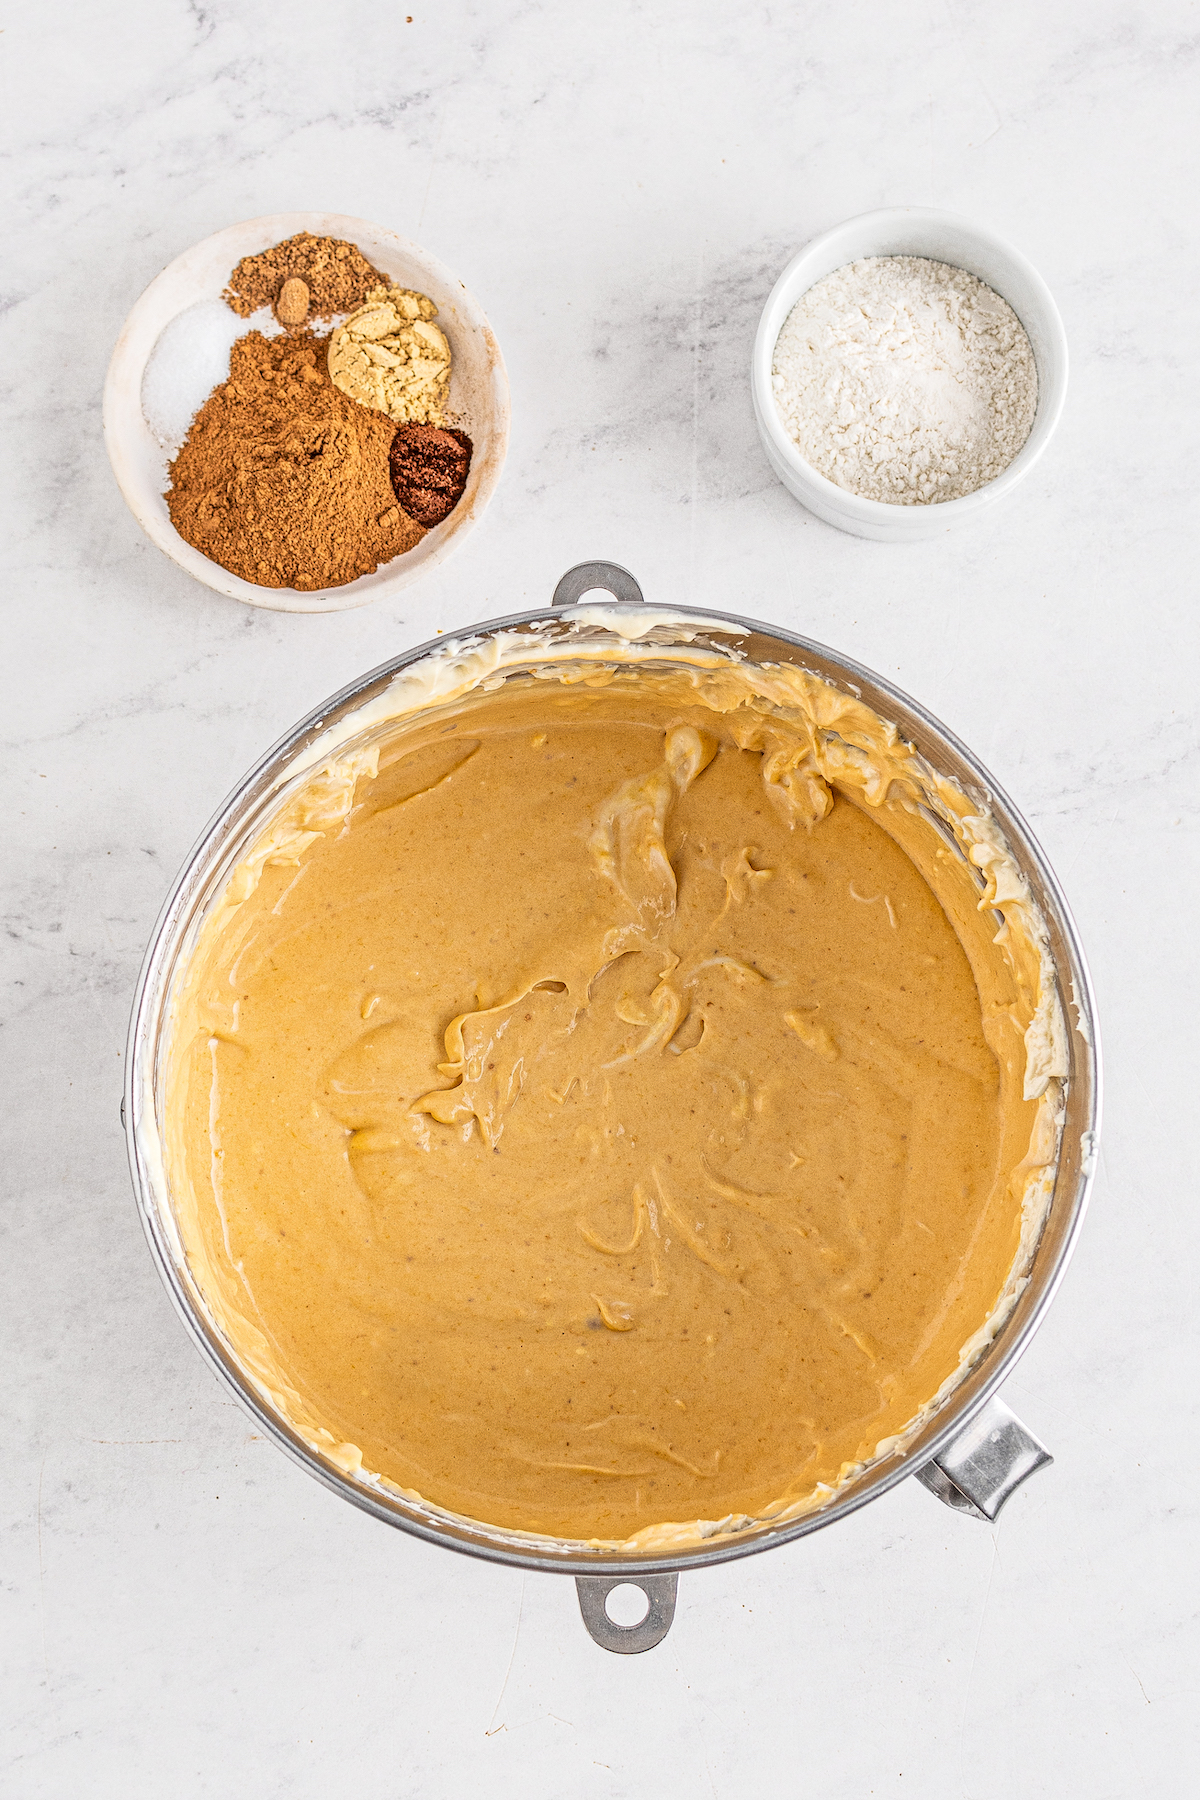 A large mixing bowl with creamy, pumpkin batter inside. Smaller dishes of ingredients are sitting nearby.